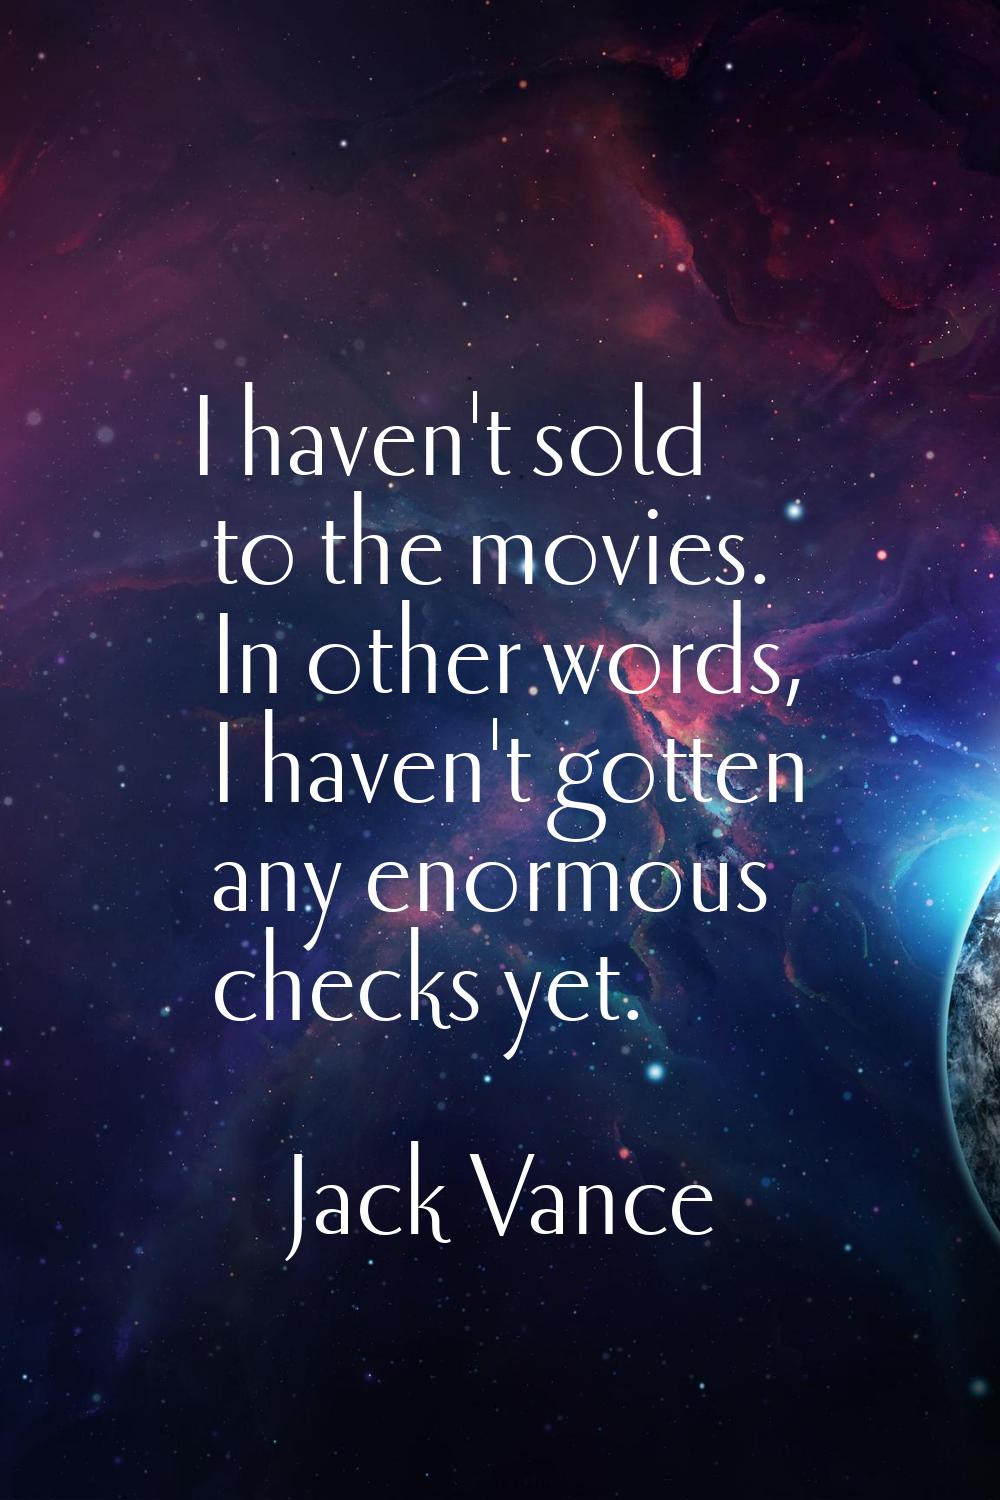 I haven't sold to the movies. In other words, I haven't gotten any enormous checks yet.